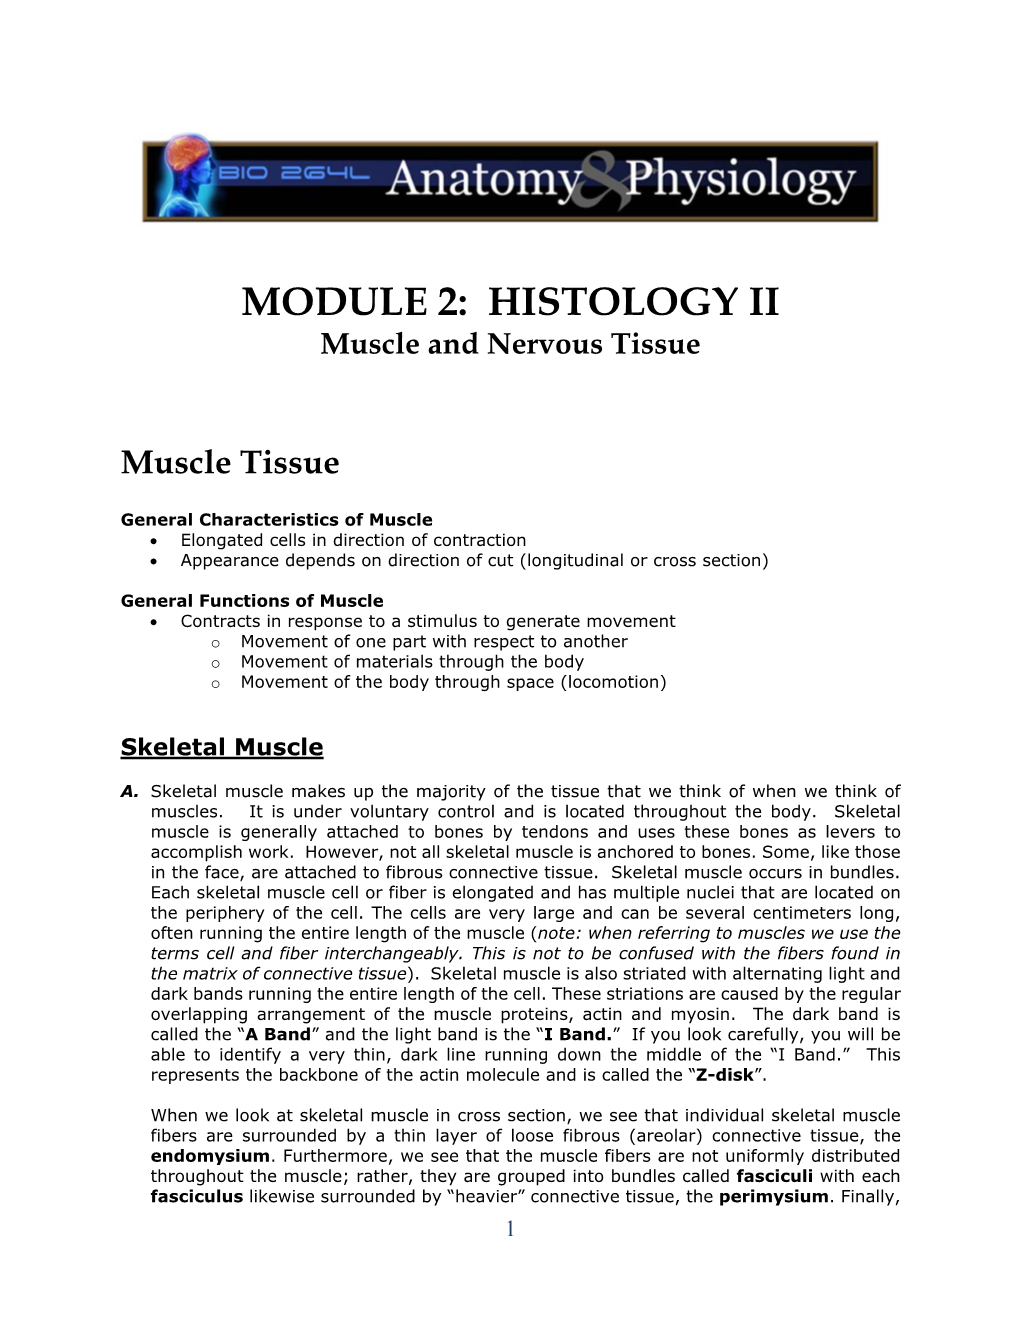 MODULE 2: HISTOLOGY II Muscle and Nervous Tissue